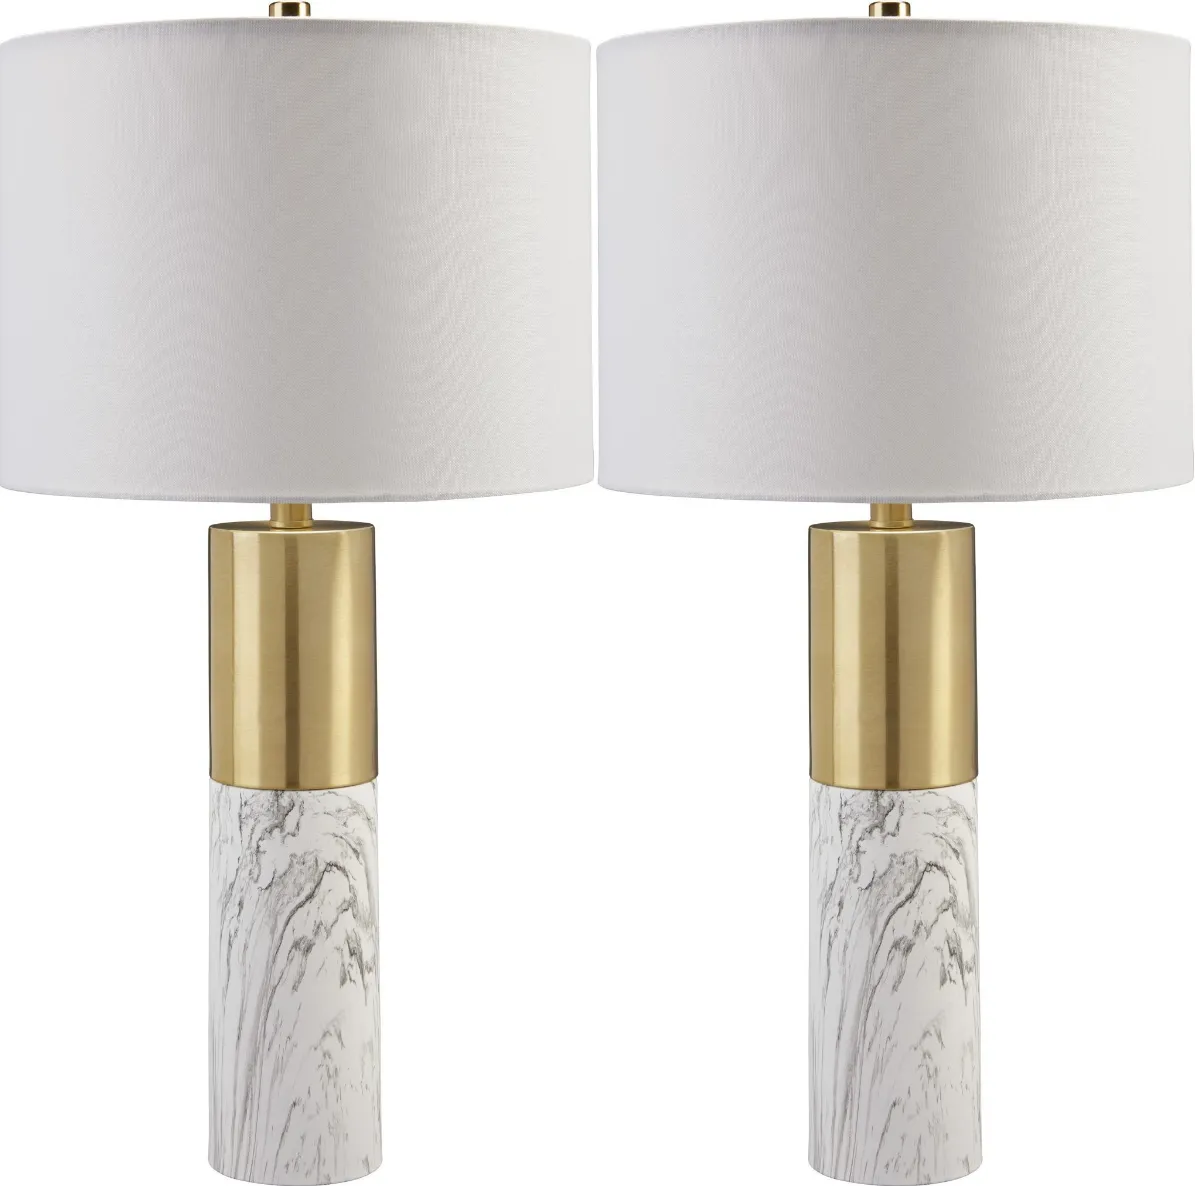 Signature Design by Ashley® Samney 2-Piece Gold/White Table Lamps